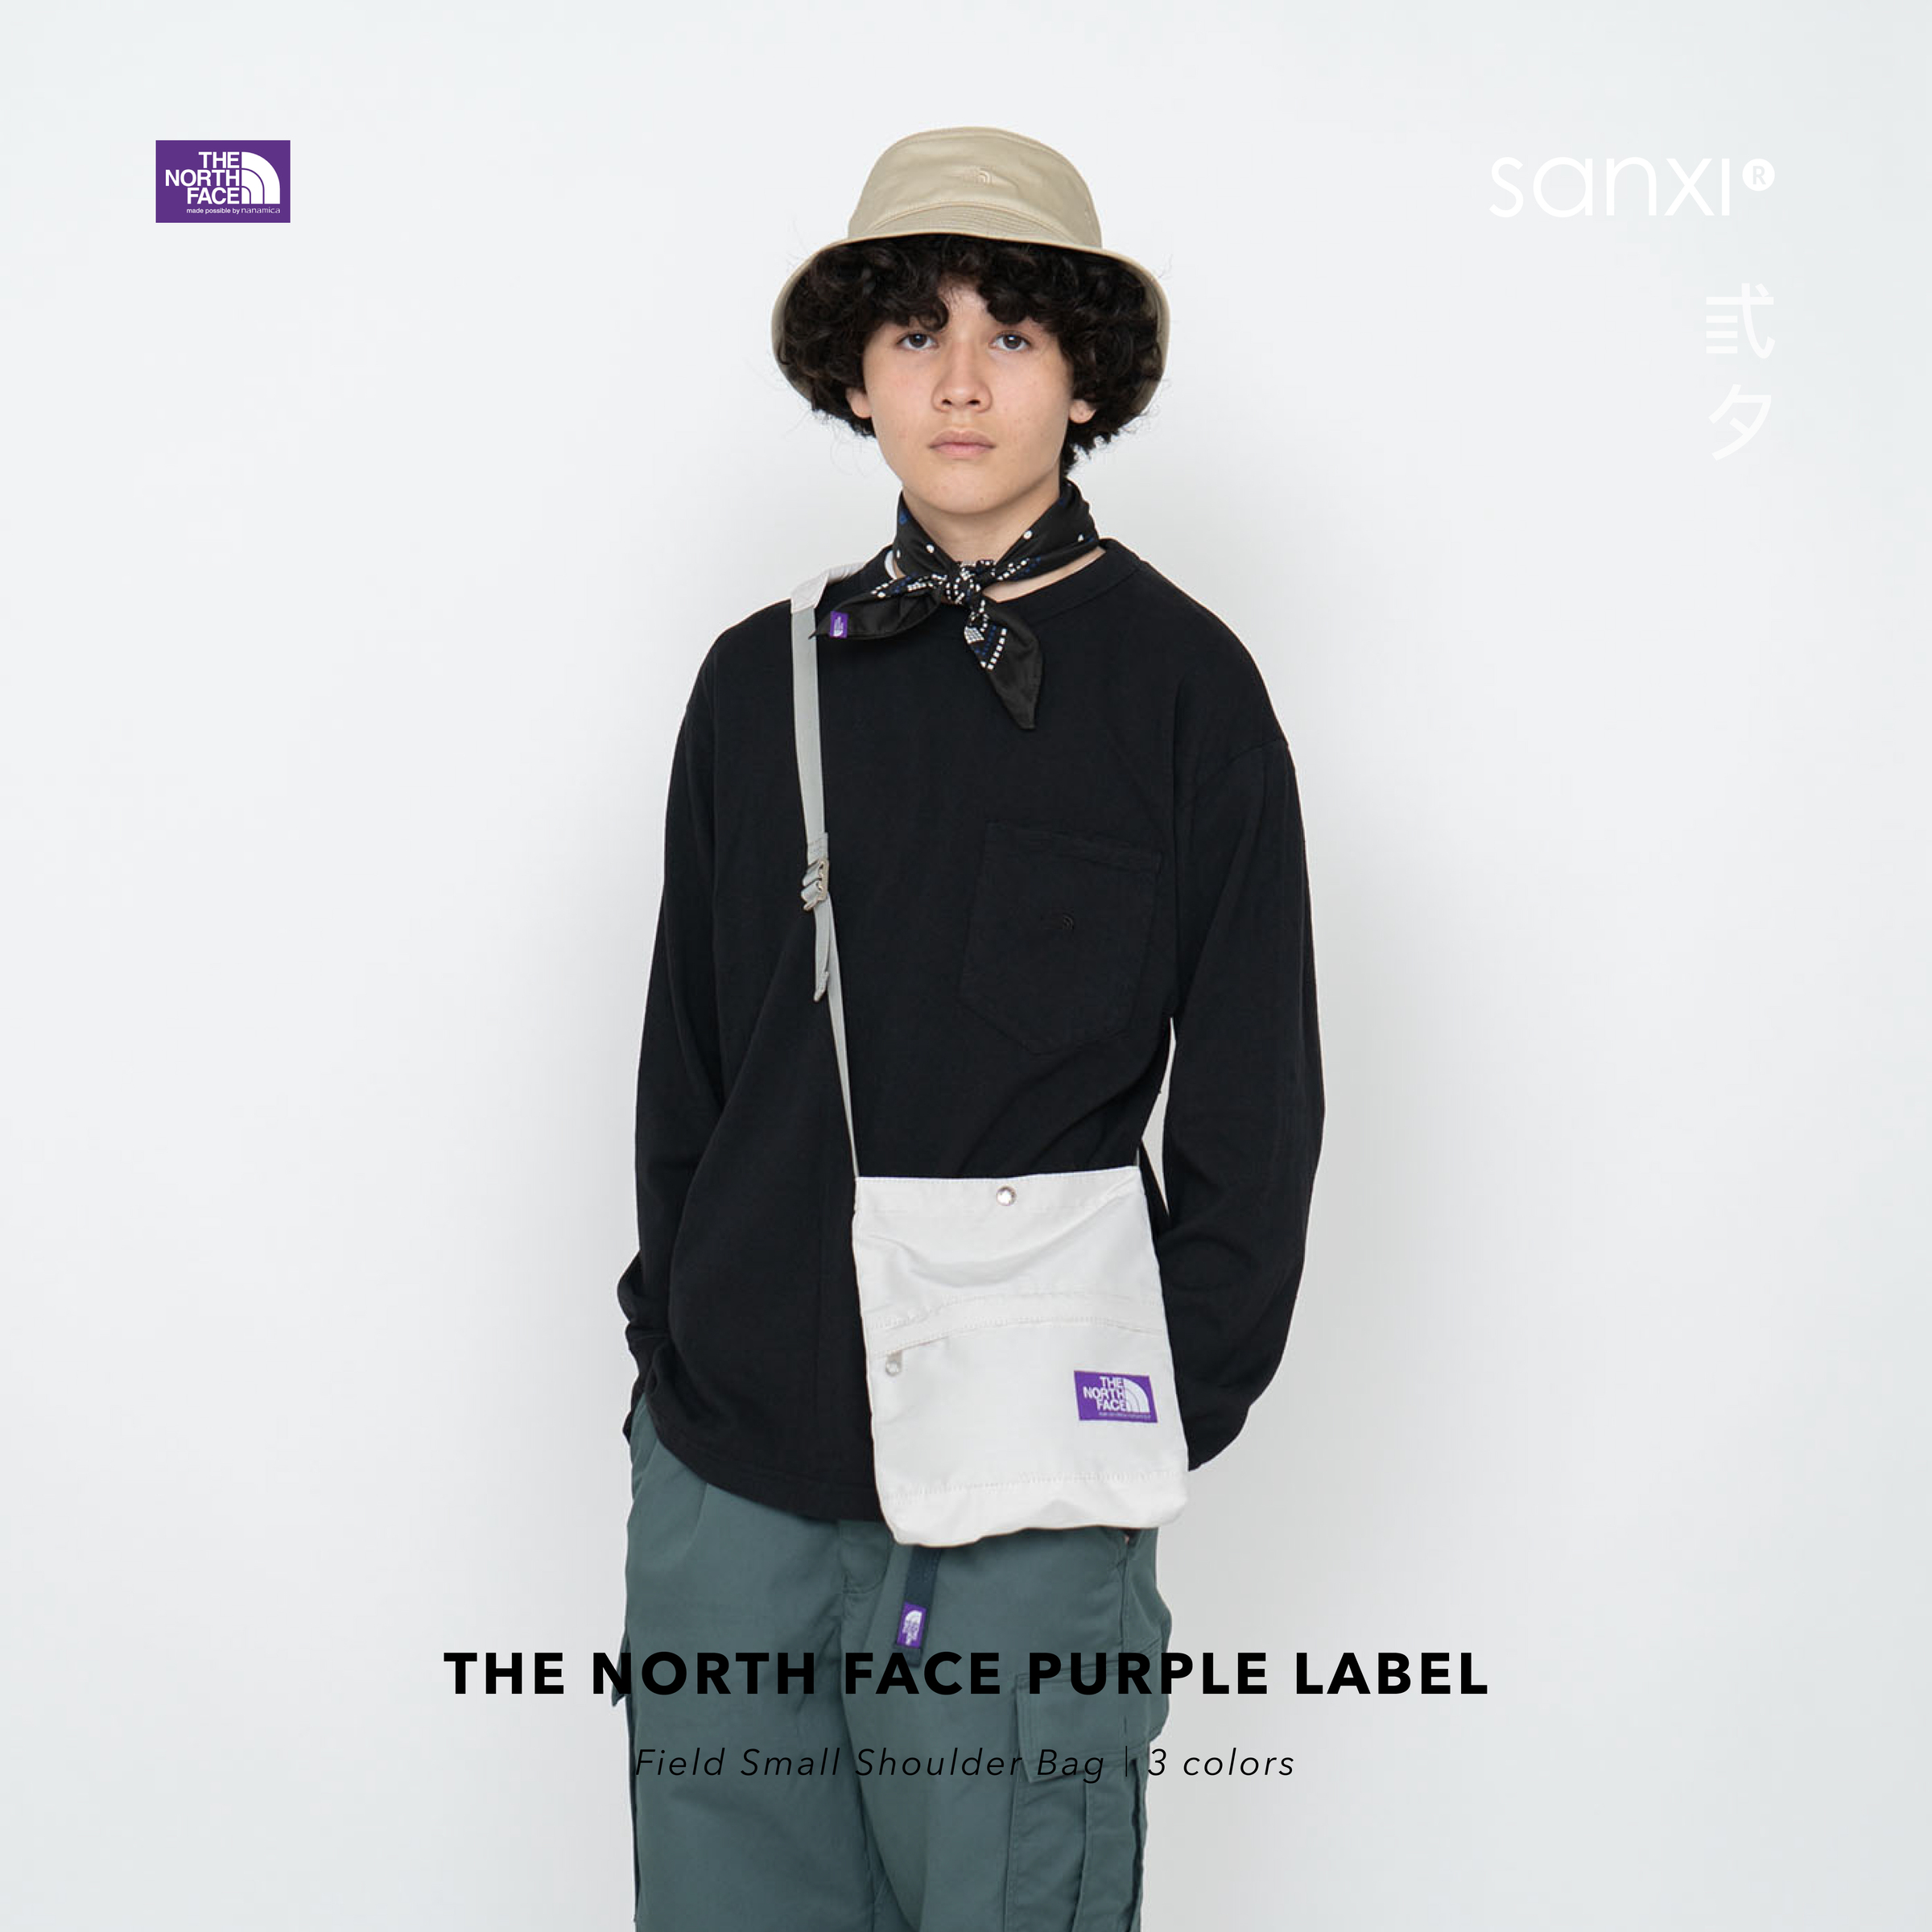 23SS THE NORTH FACE PURPLE LABEL Field Small Shoulder Bag 紫標斜背包 (3色)